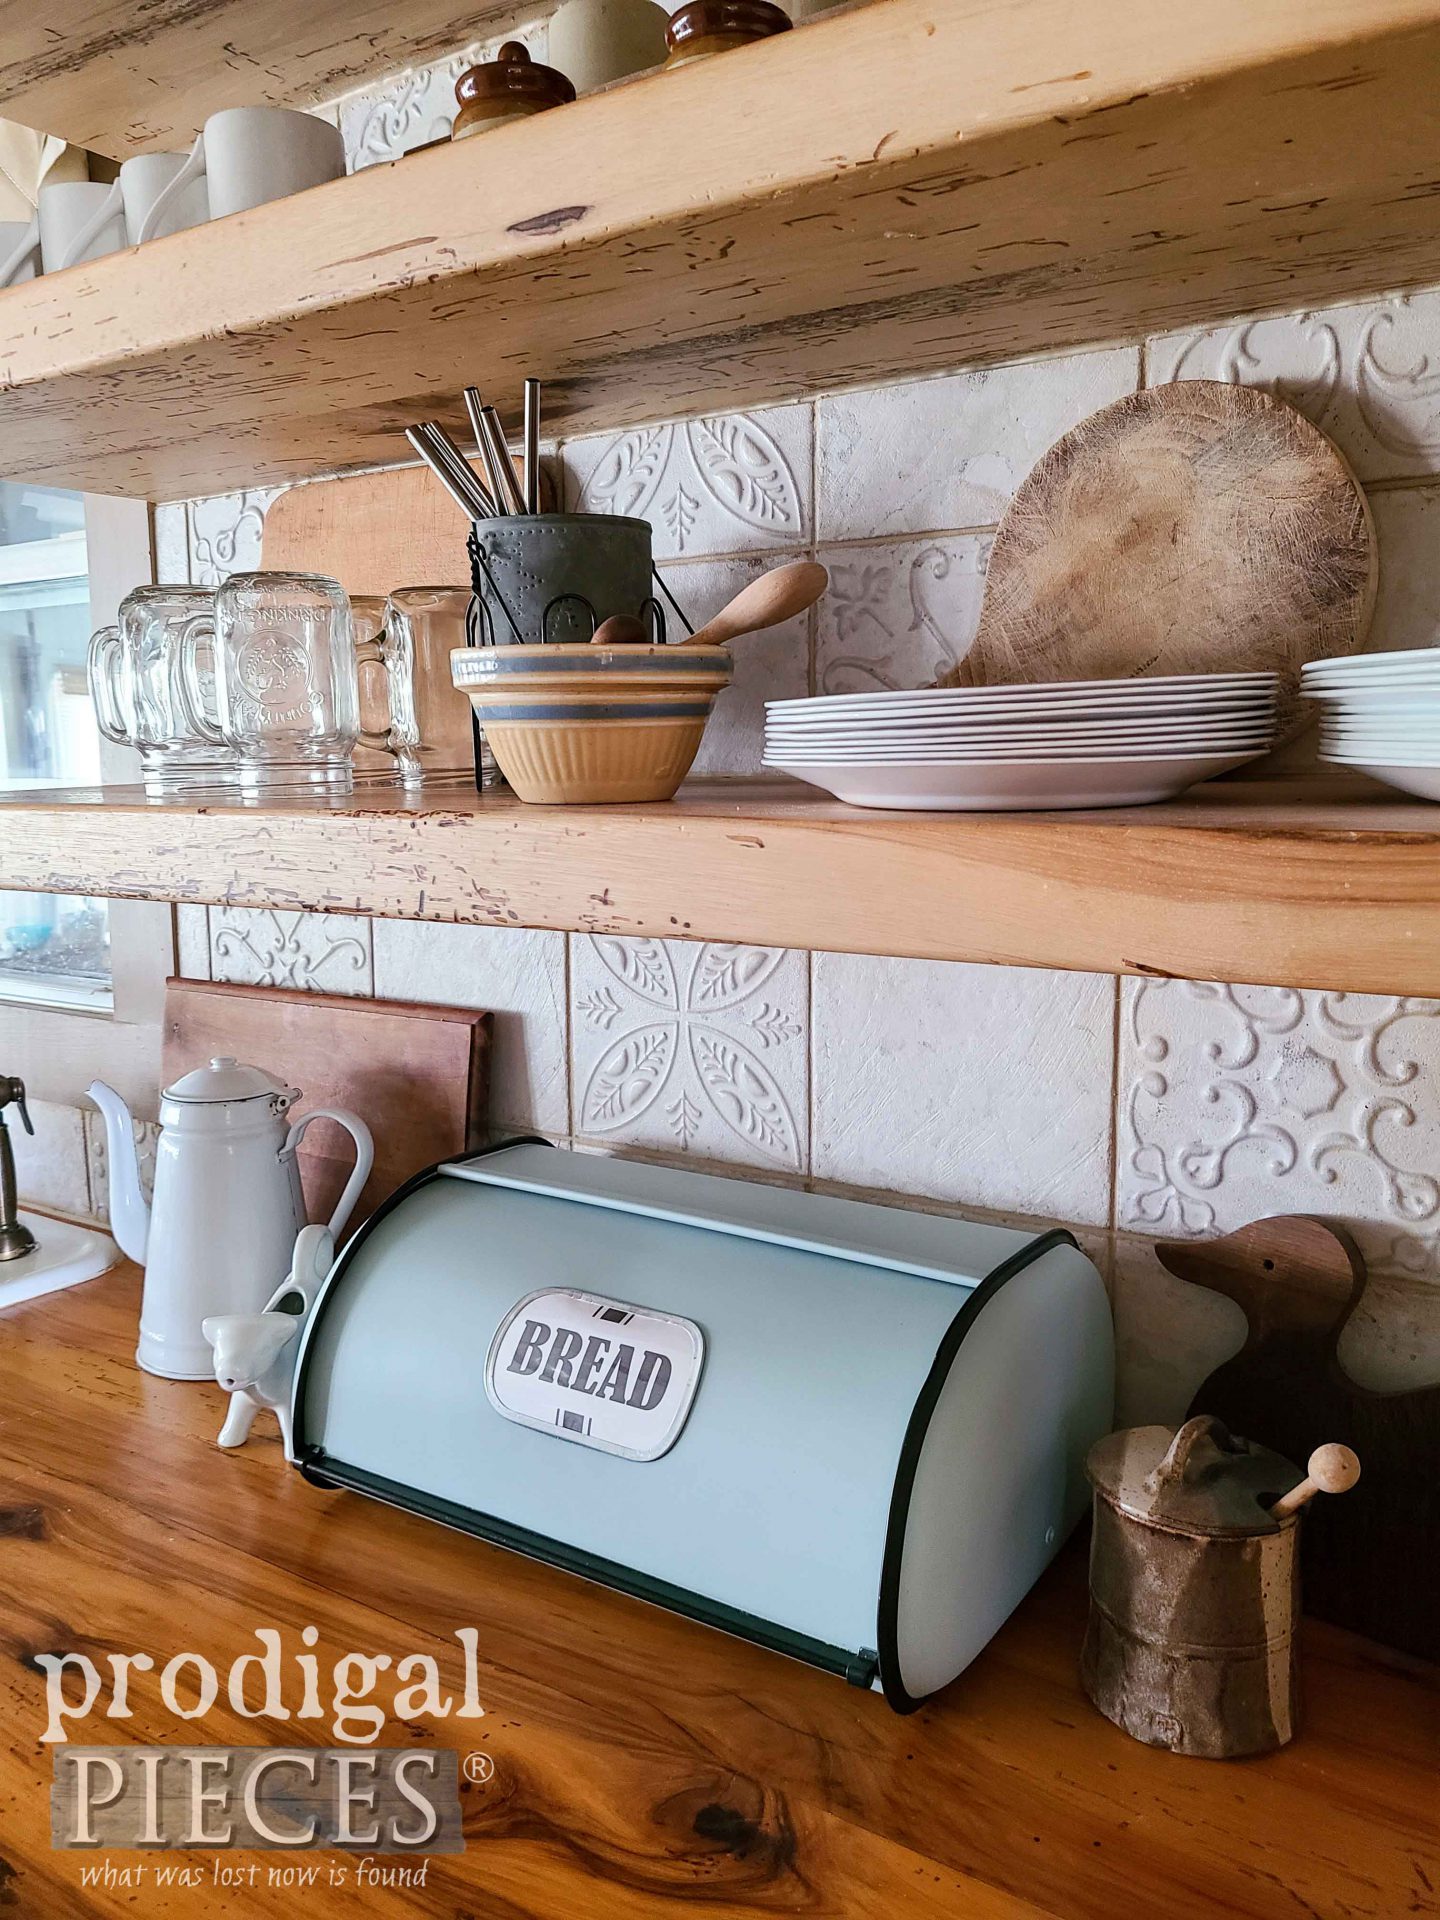 Farmhouse Kitchen with DIY Bread Box Makeover by Larissa of Prodigal Pieces | prodigalpieces.com #prodigalpieces #diy #upcycled #kitchen